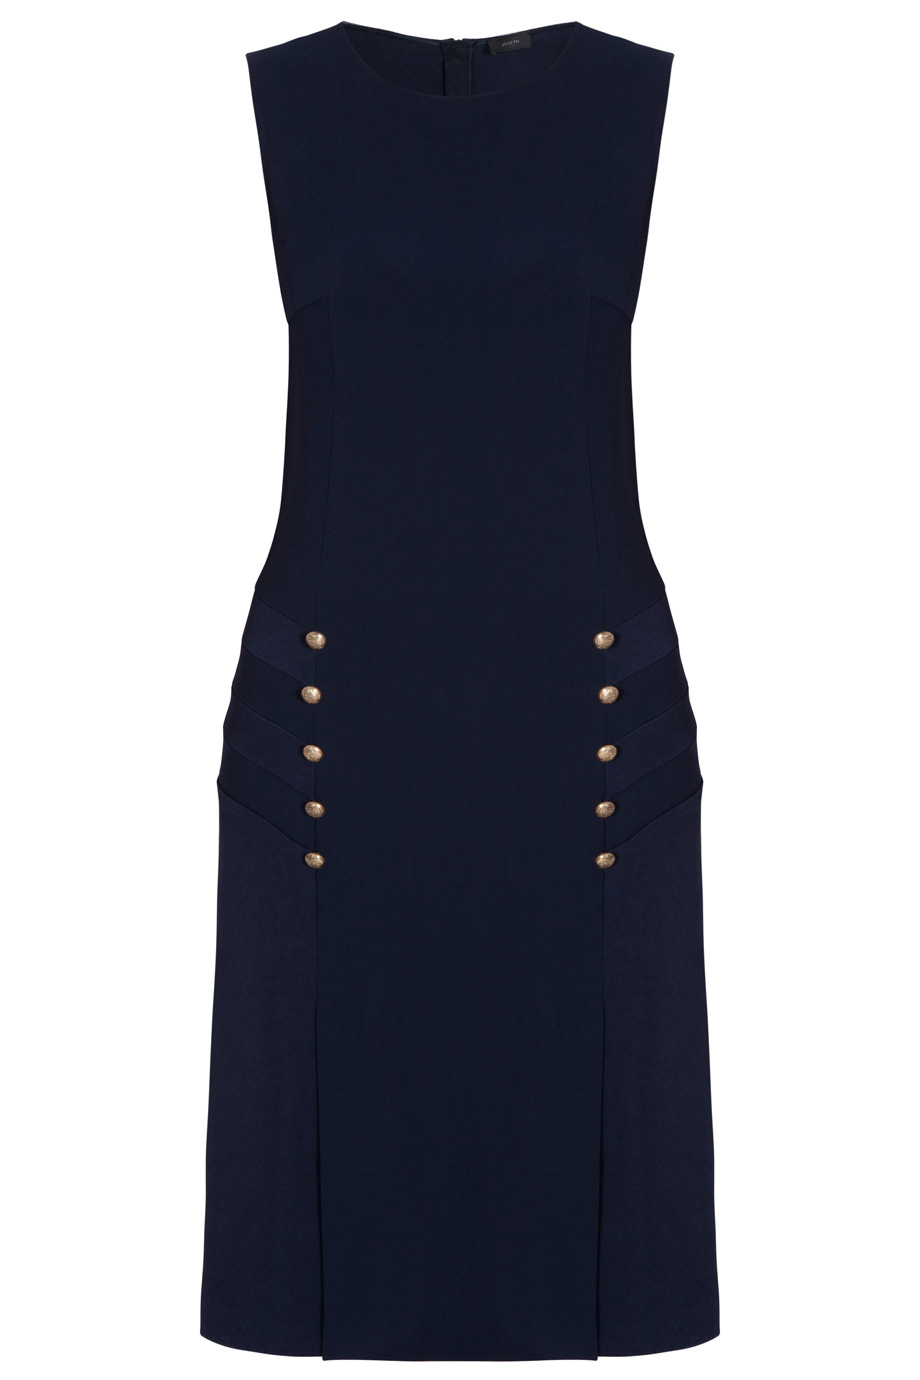 Lyst - Joseph Step Military Side Button Dress in Blue